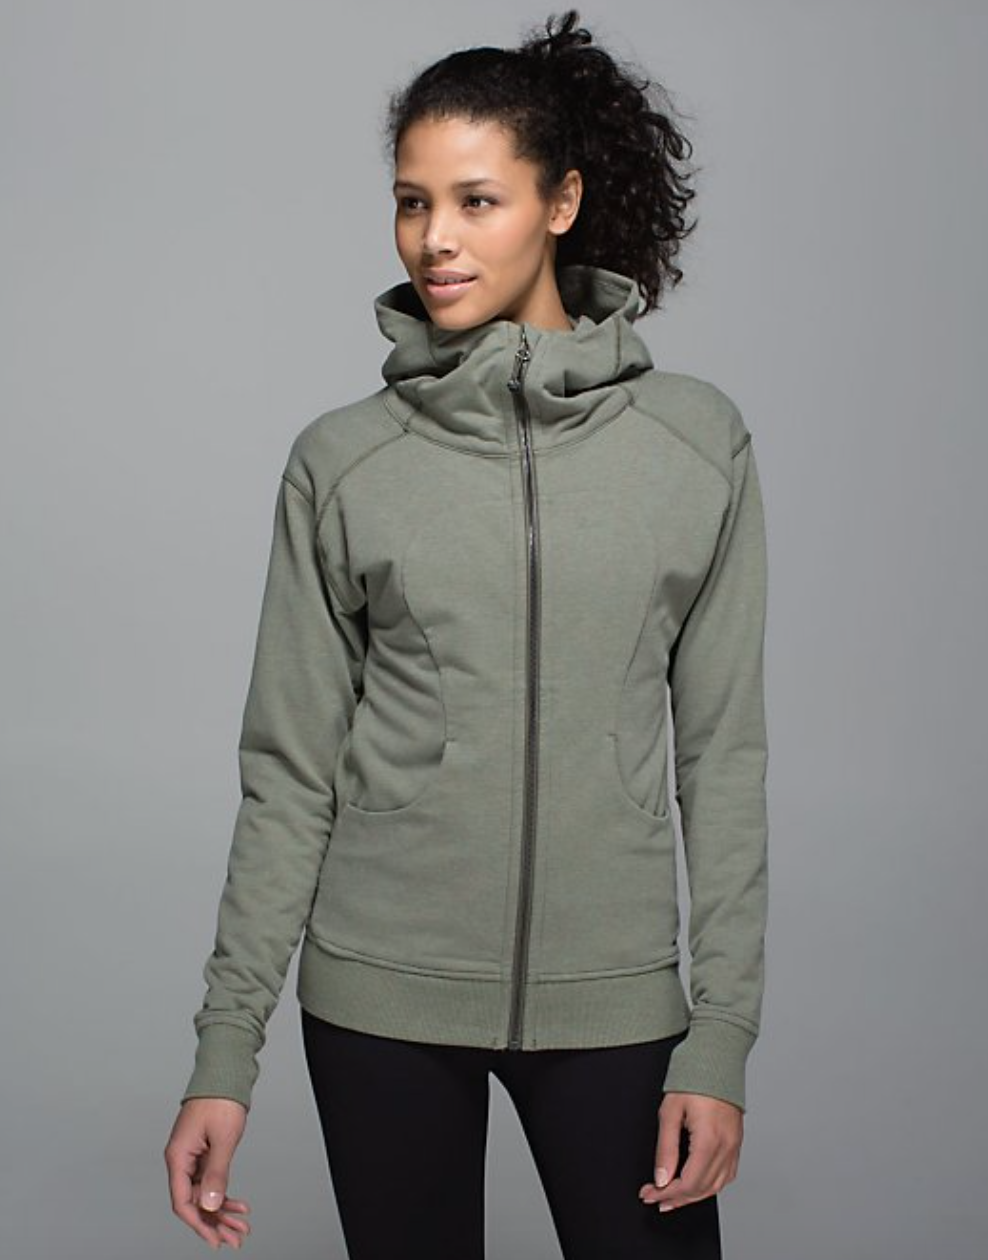 Lululemon 2015 Year In Review - The Sweat Edit